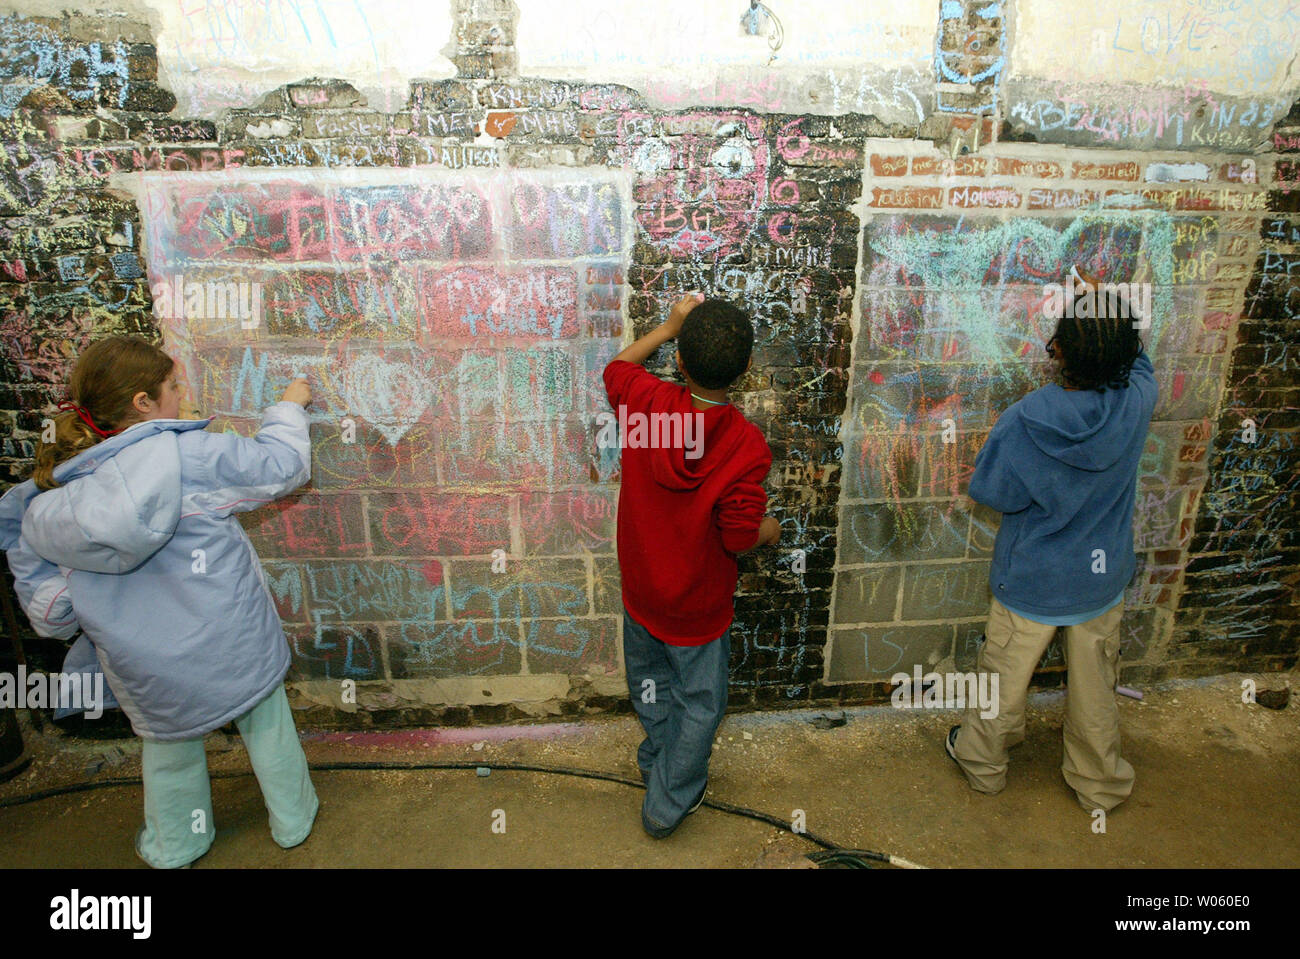 Children try their artistic abilities as they do graffiti murals during First Night St. Louis in St. Louis on December 31, 2004. First Night St. Louis is a alcohol-free, visual and performing arts festival geared toward family oriented actvities to welcome the New Year. (UPI Photo/Bill Greenblatt) Stock Photo